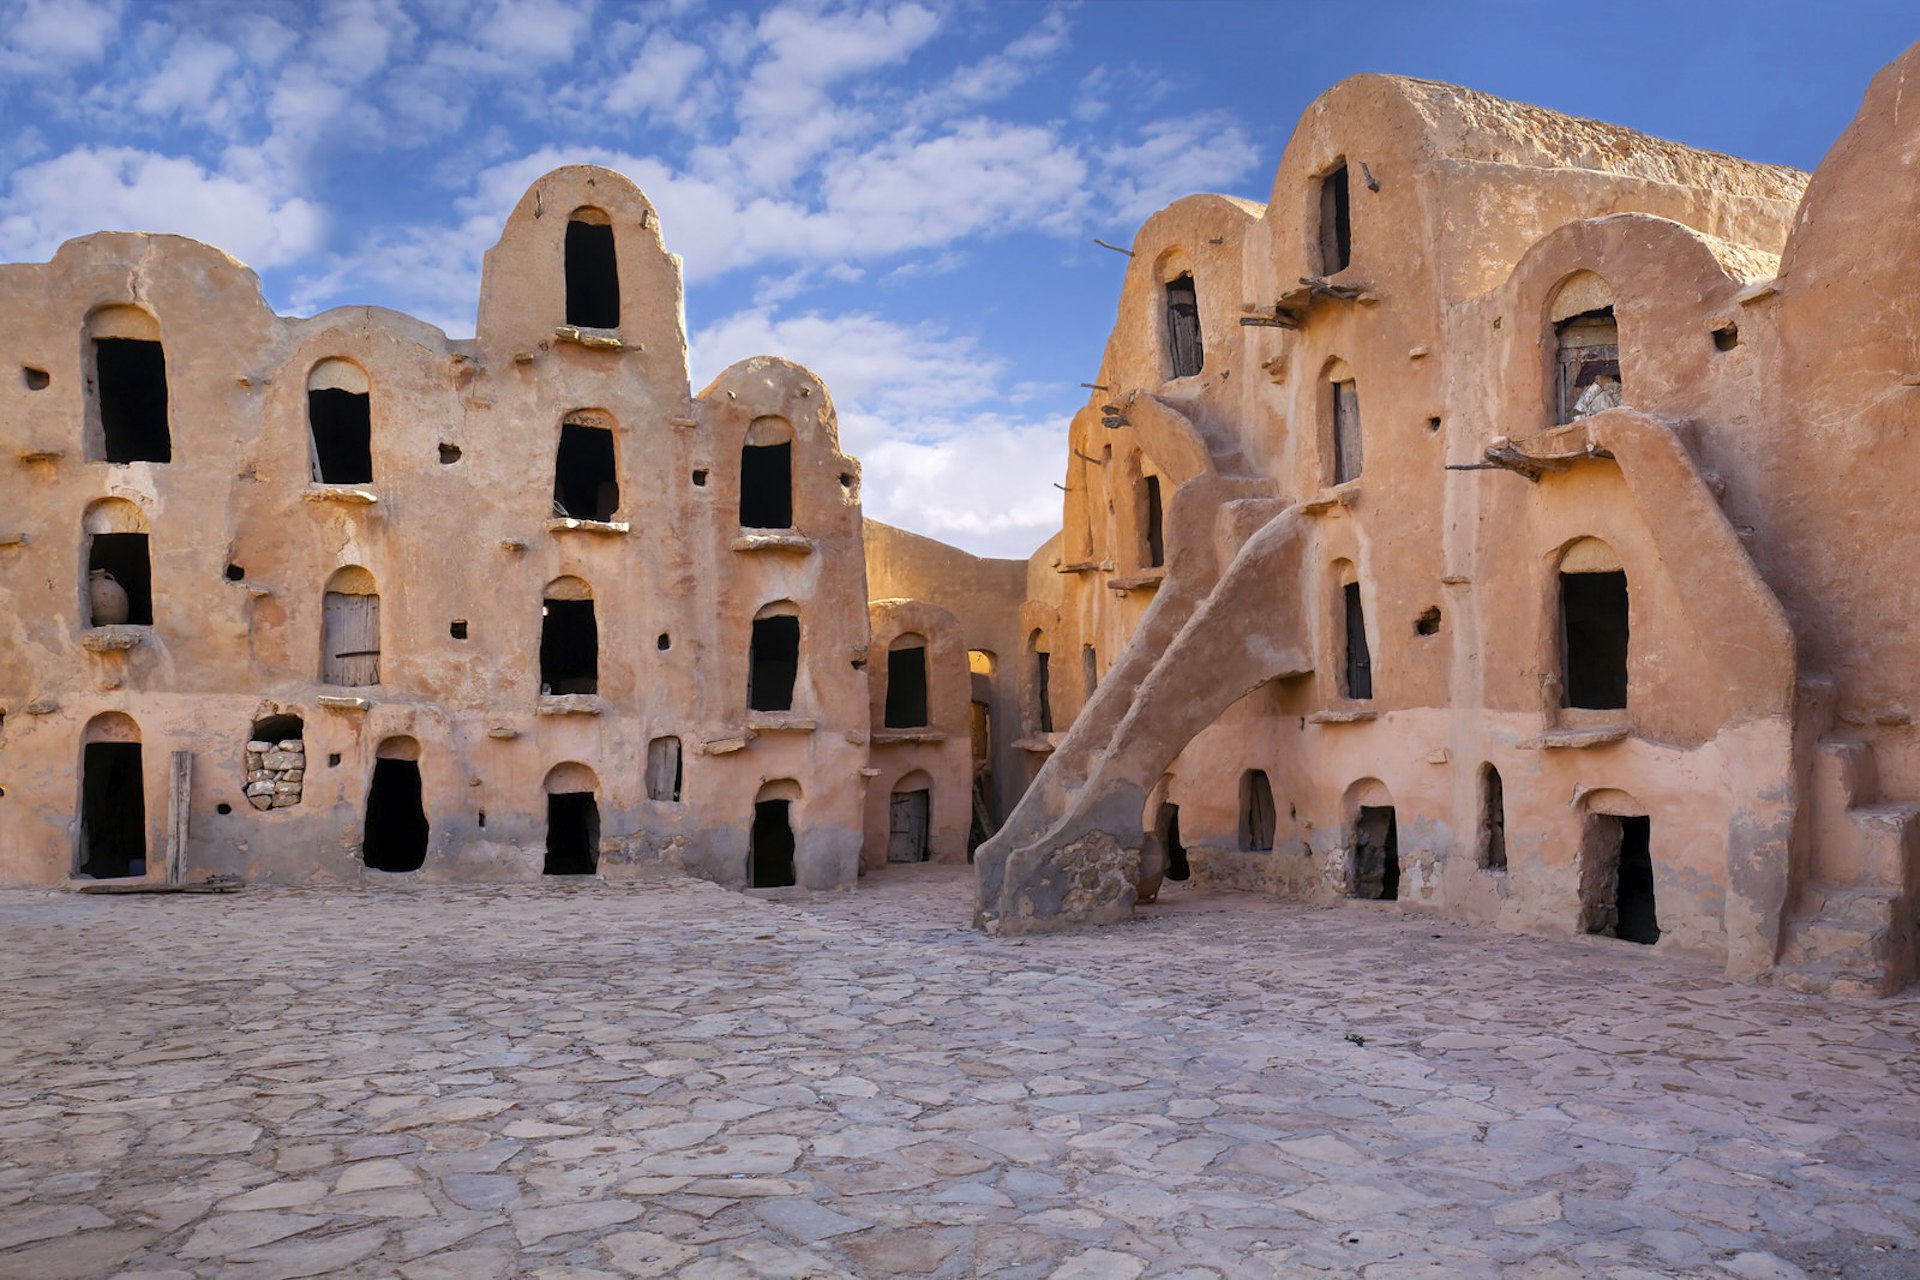 The courtyard of Ksar Oued Soltane, a fortified granary or ksar, located in the Tataouine district in southern Tunisia. 